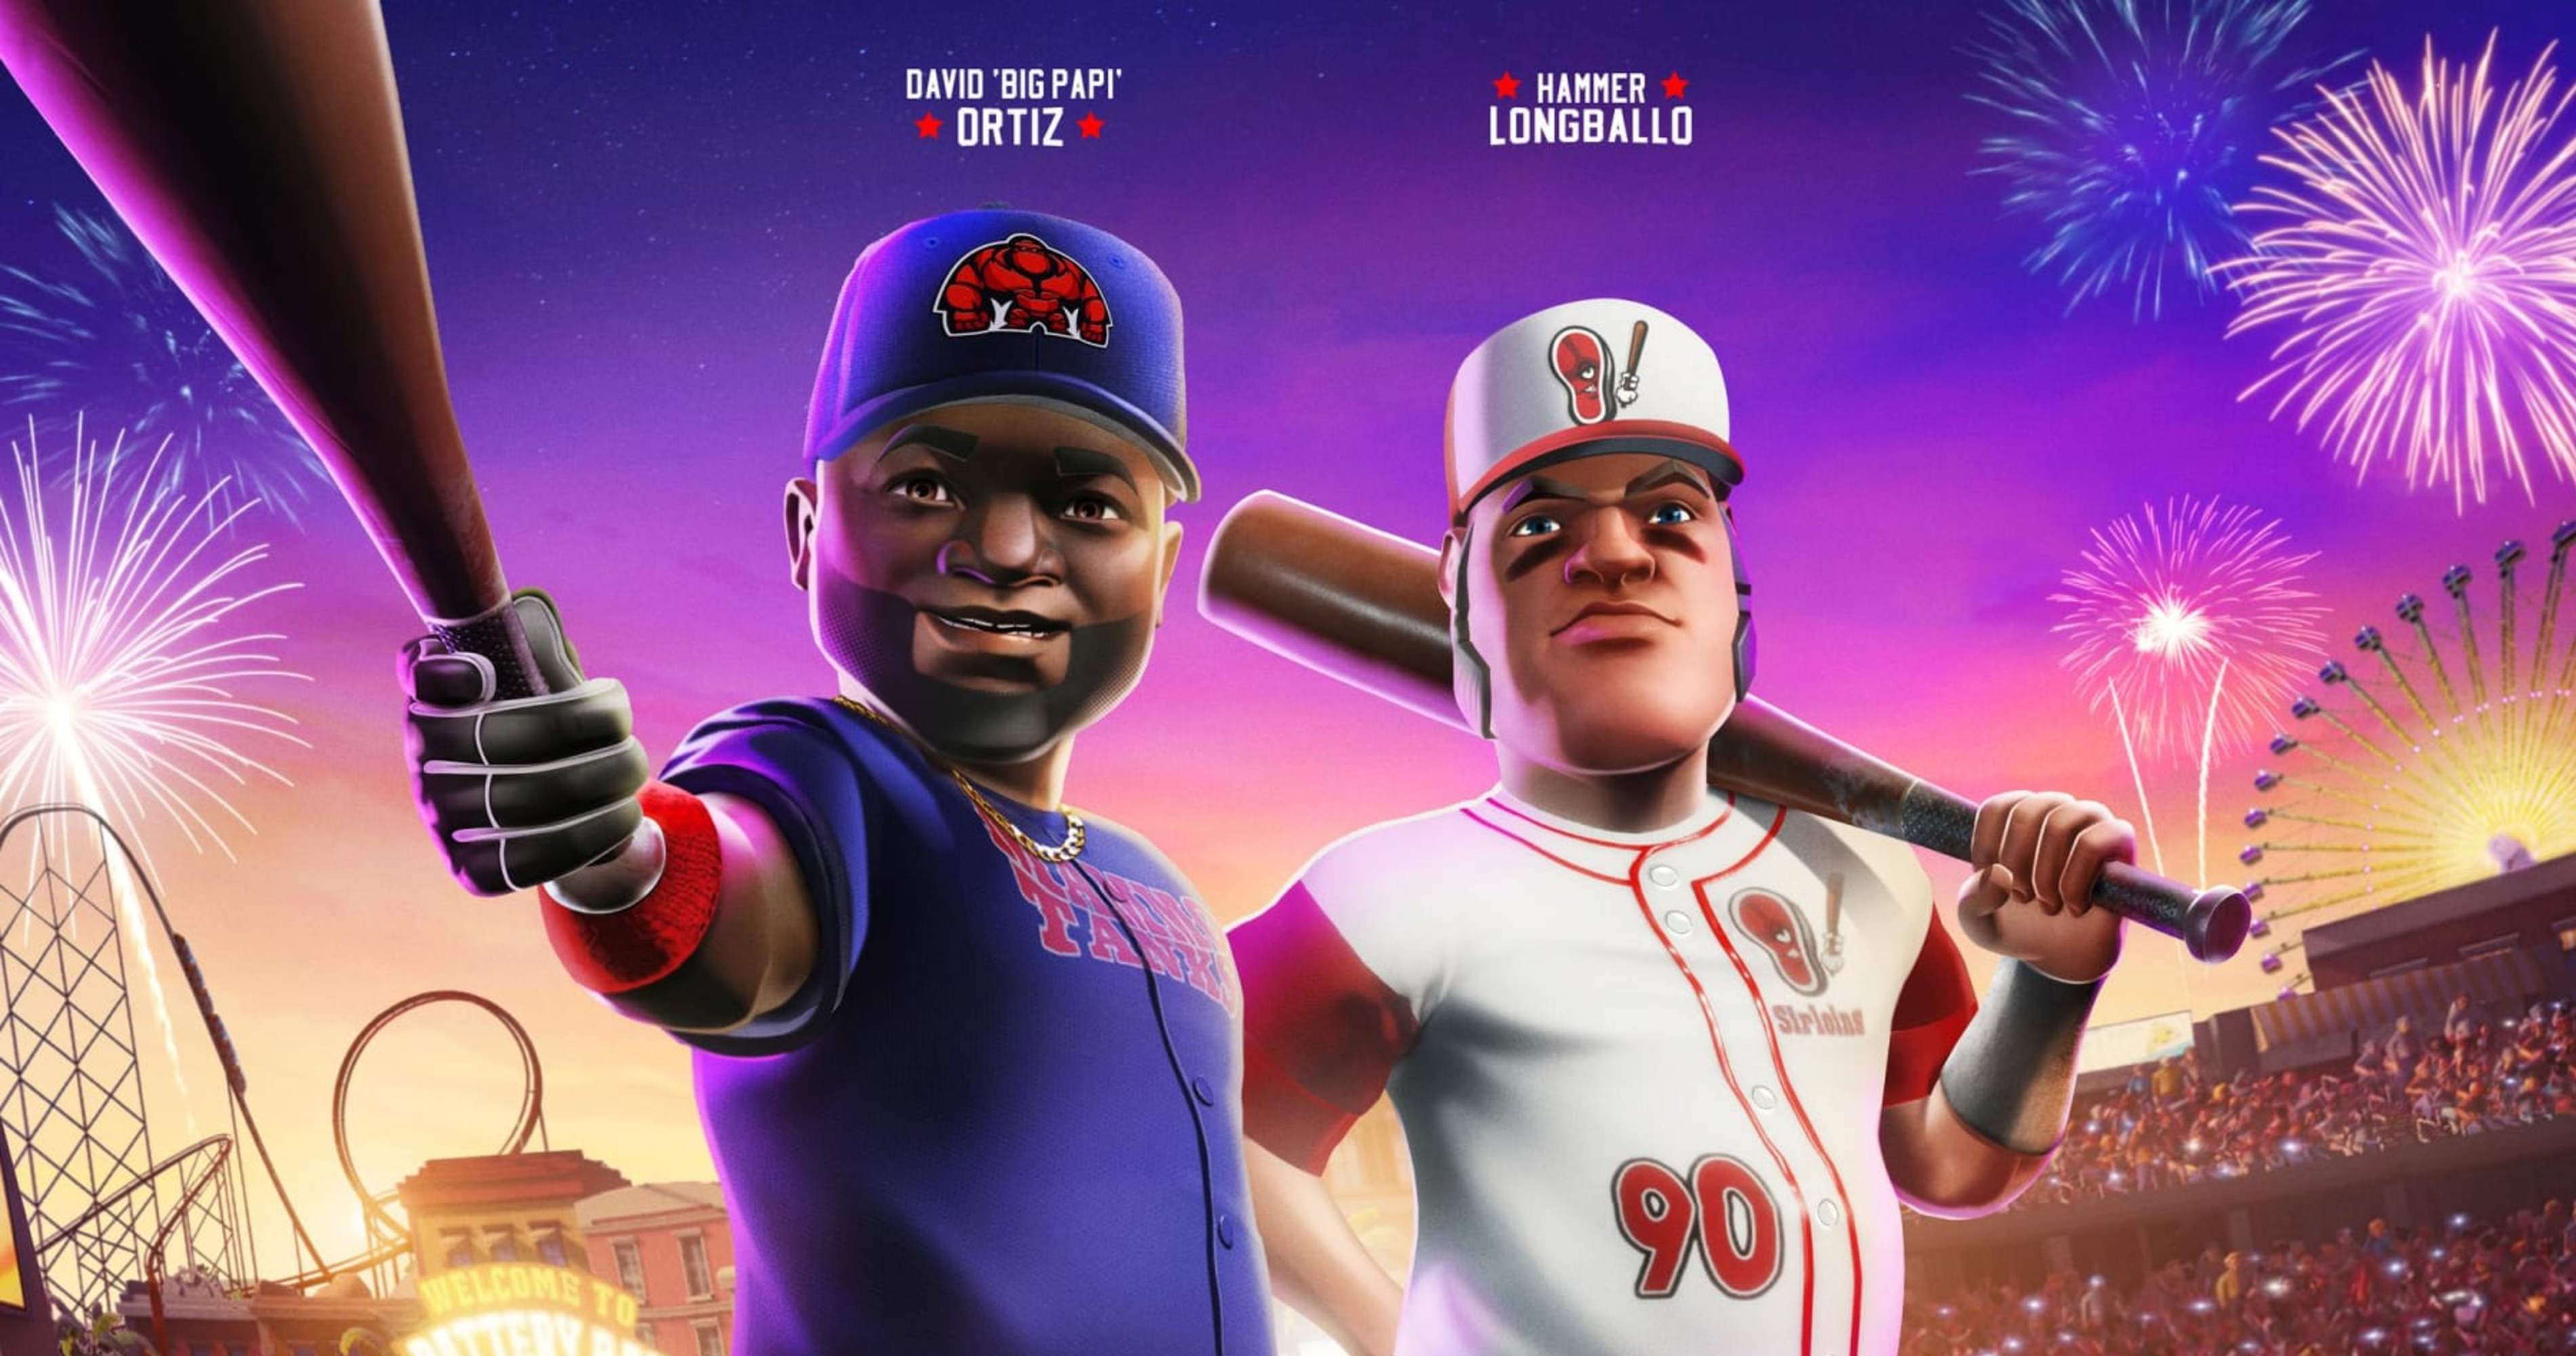 Super Mega Baseball 4 Review Gameplay Videos, Features, Modes and